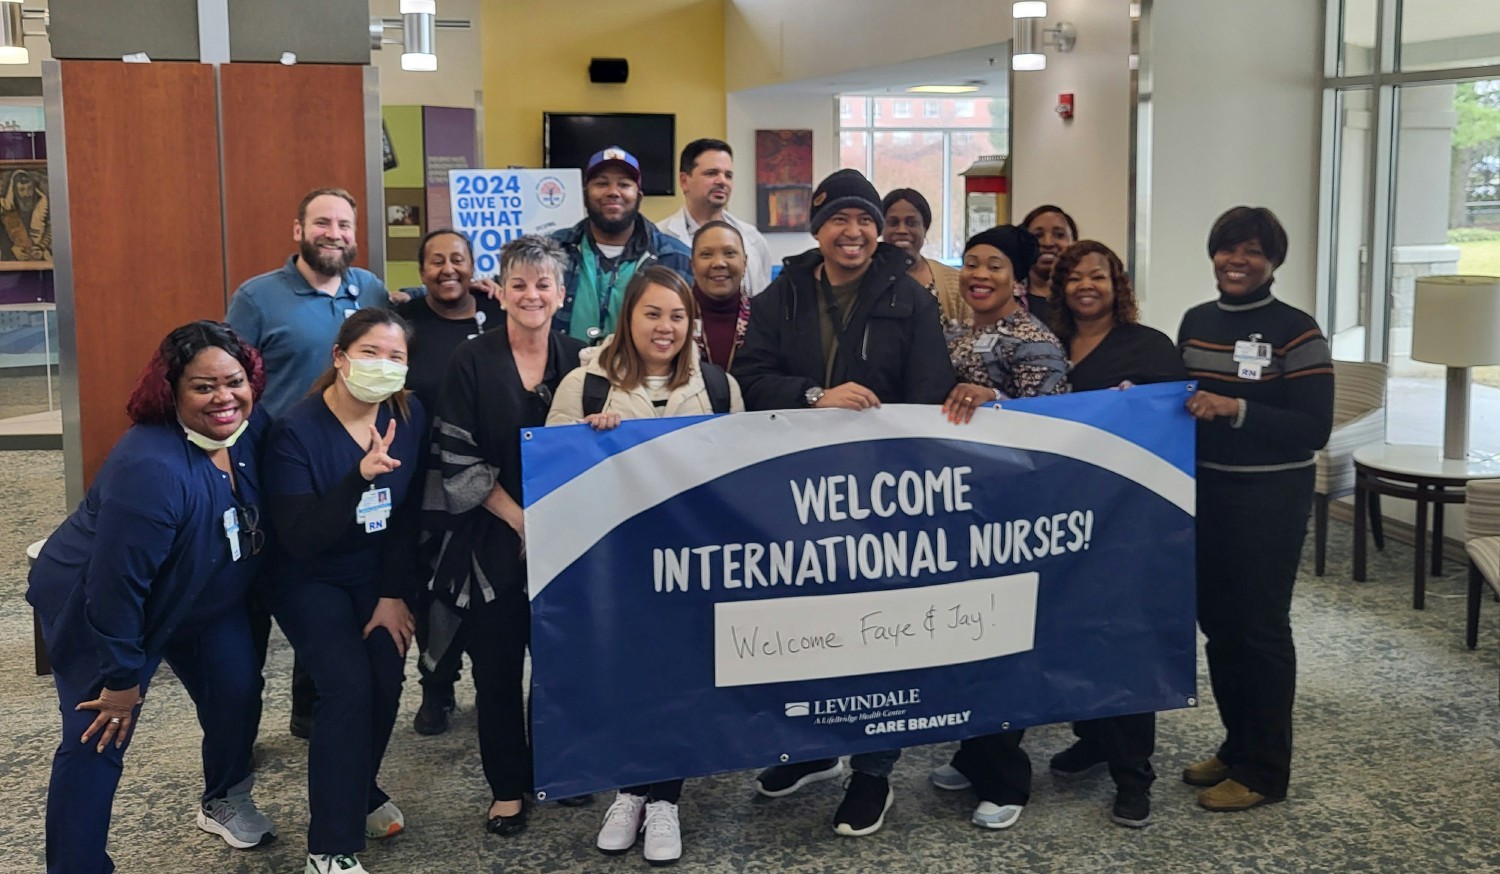 Levindale team warmly welcomes new staff - two international nurses who relocated to the United States to join our team!